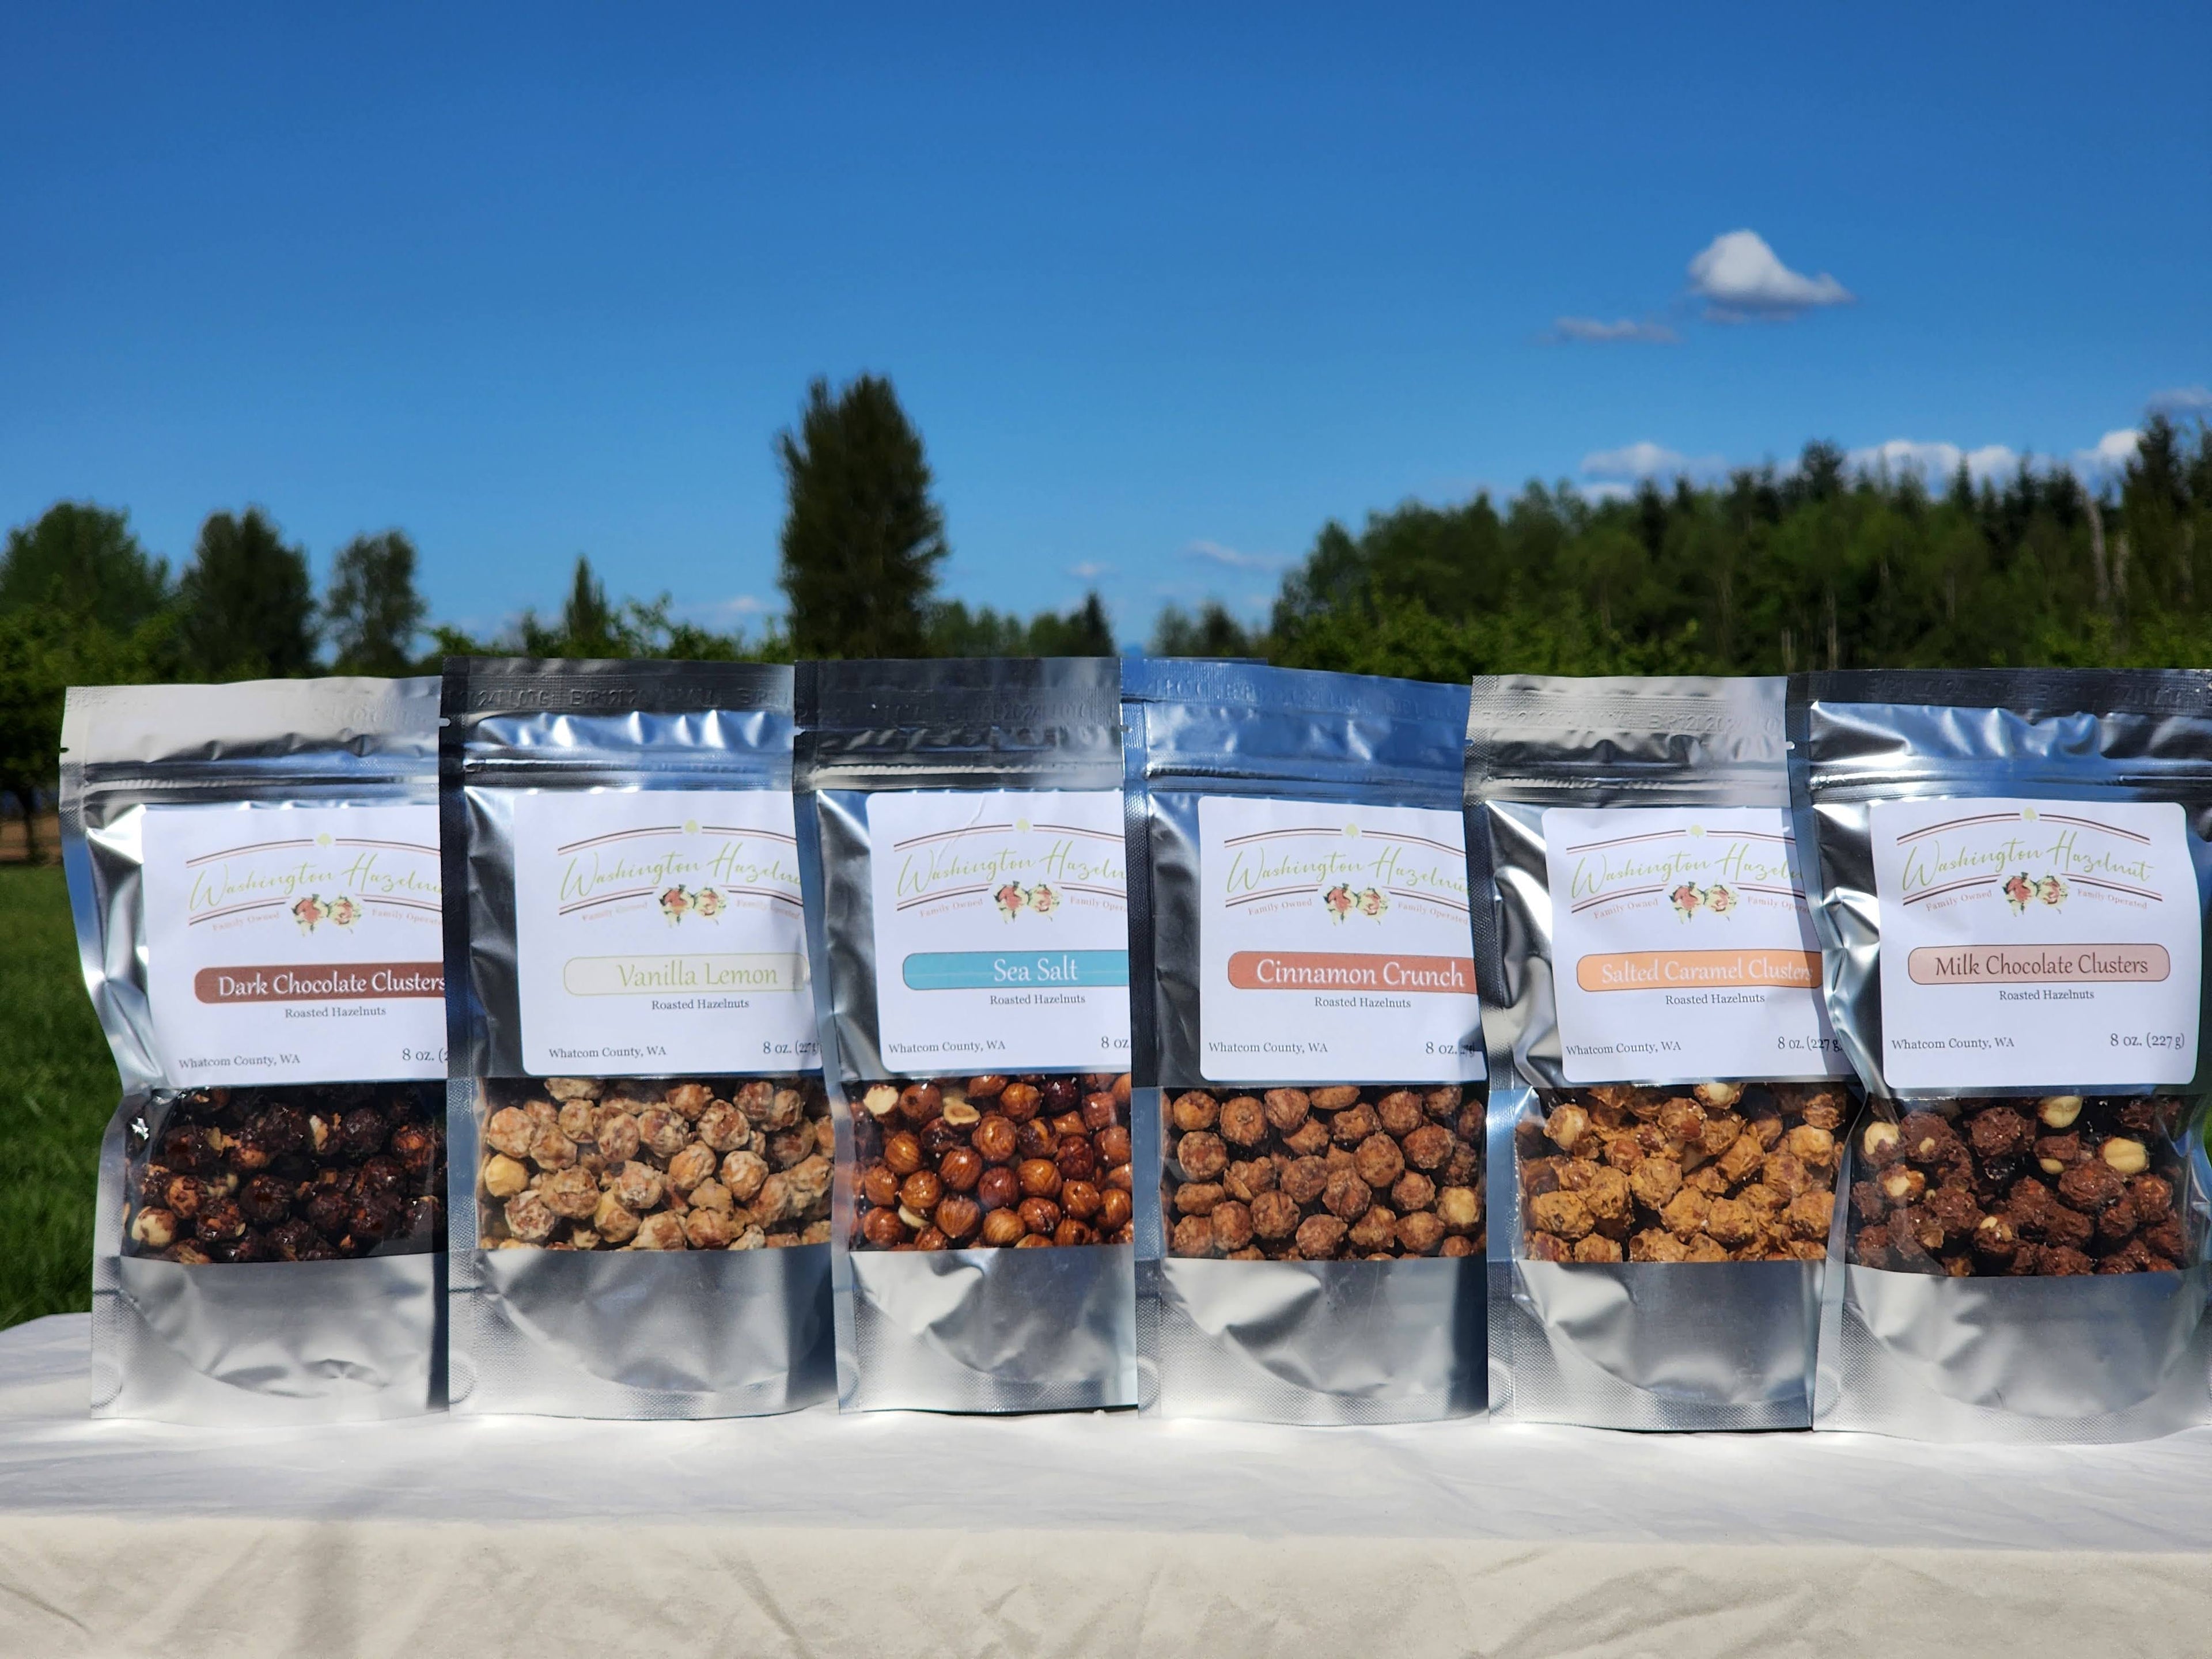 Get 10% off the purchase of 4 or more 8 oz. Flavored Hazelnut Bags!